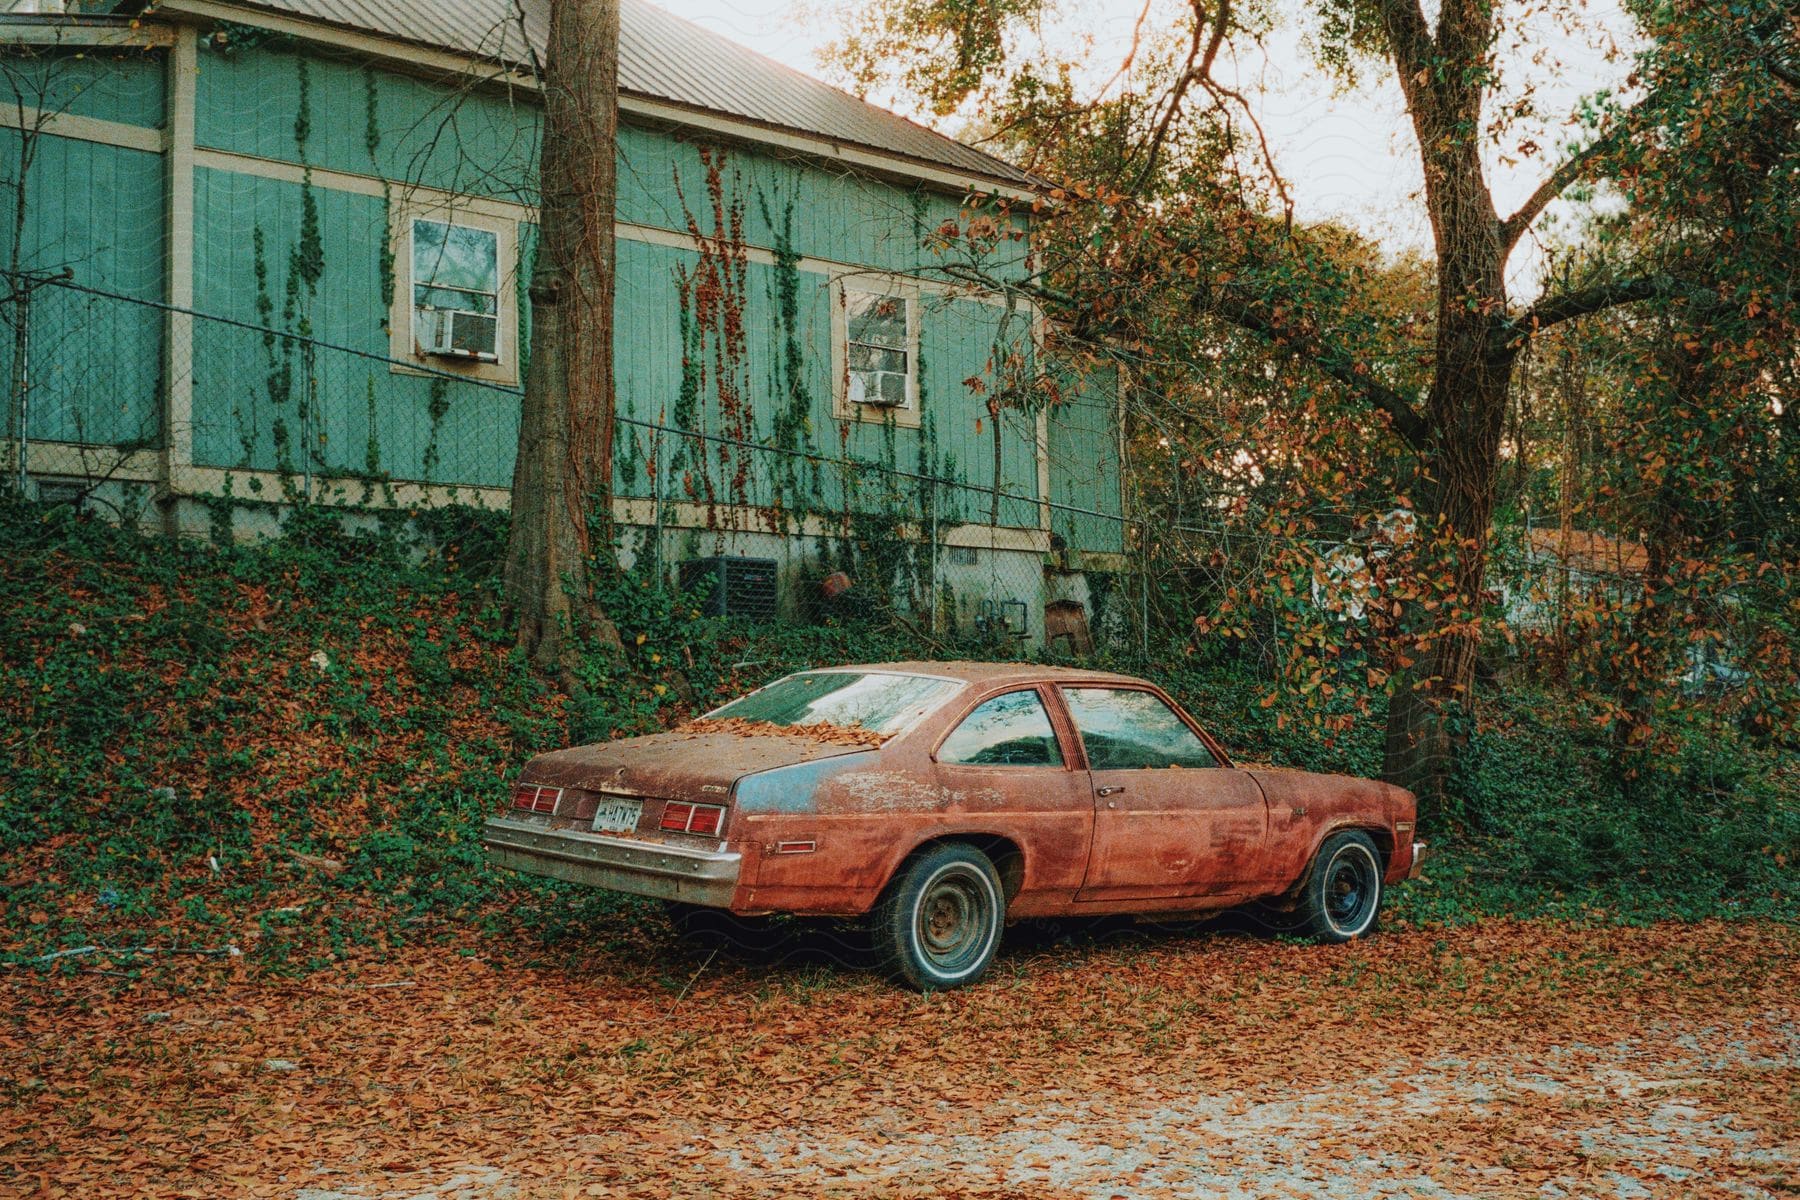 Abandoned red car surrounded by fall leaves parked near a green house in an exterior location